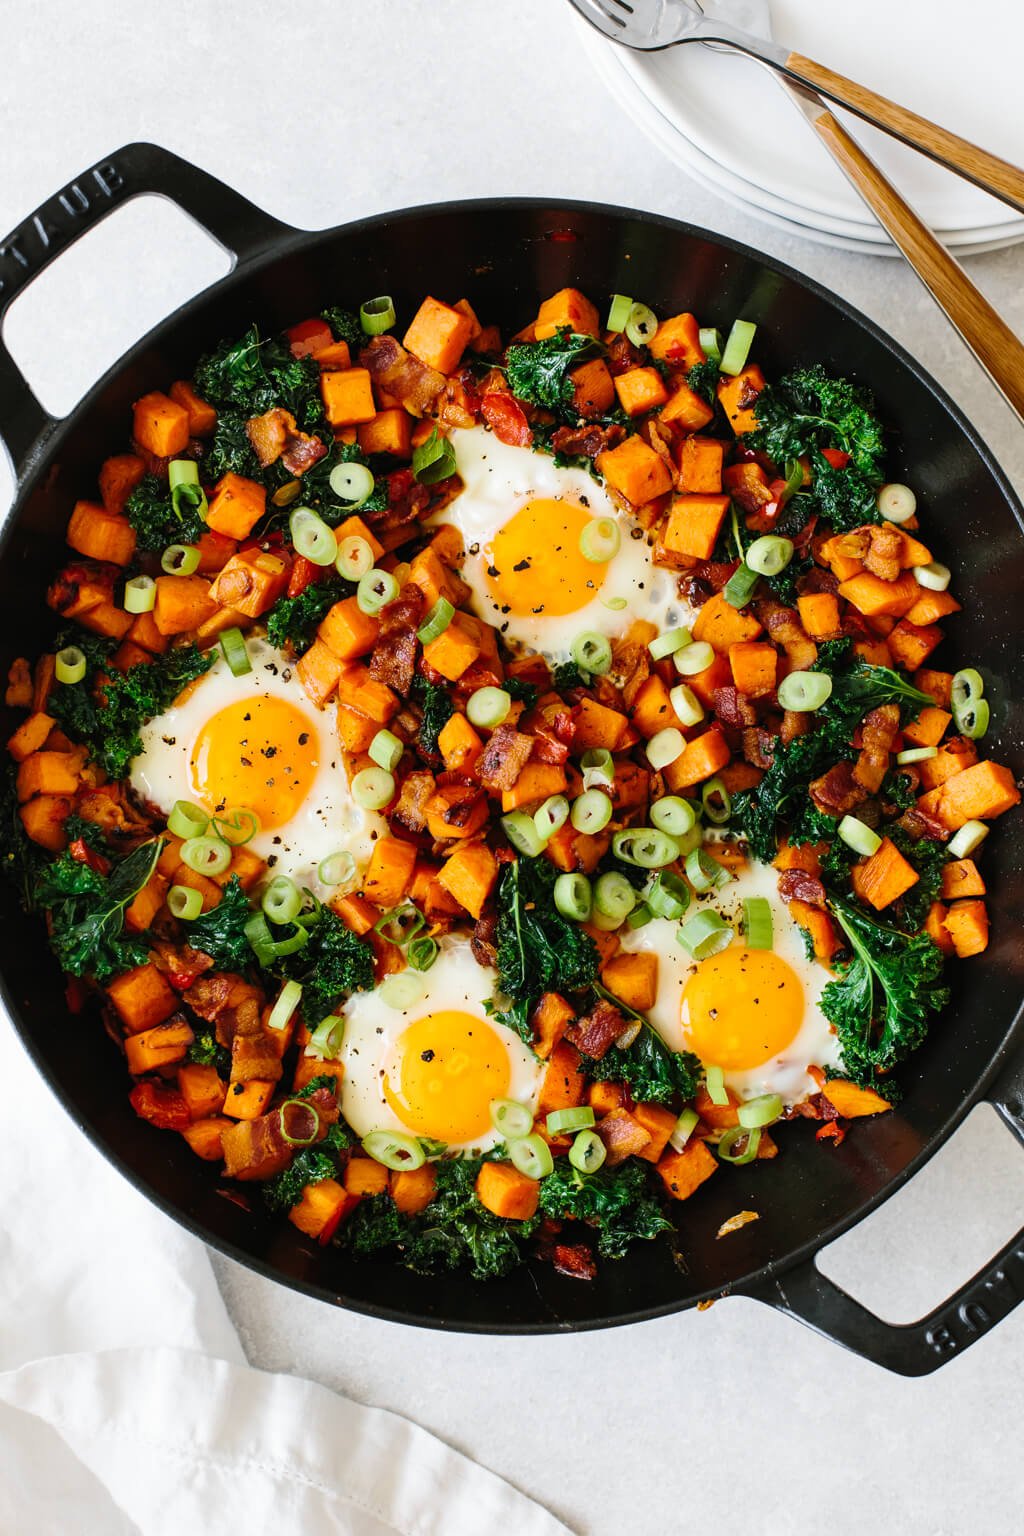 Cubed sweet potato and vegetables in a skillet with eggs.